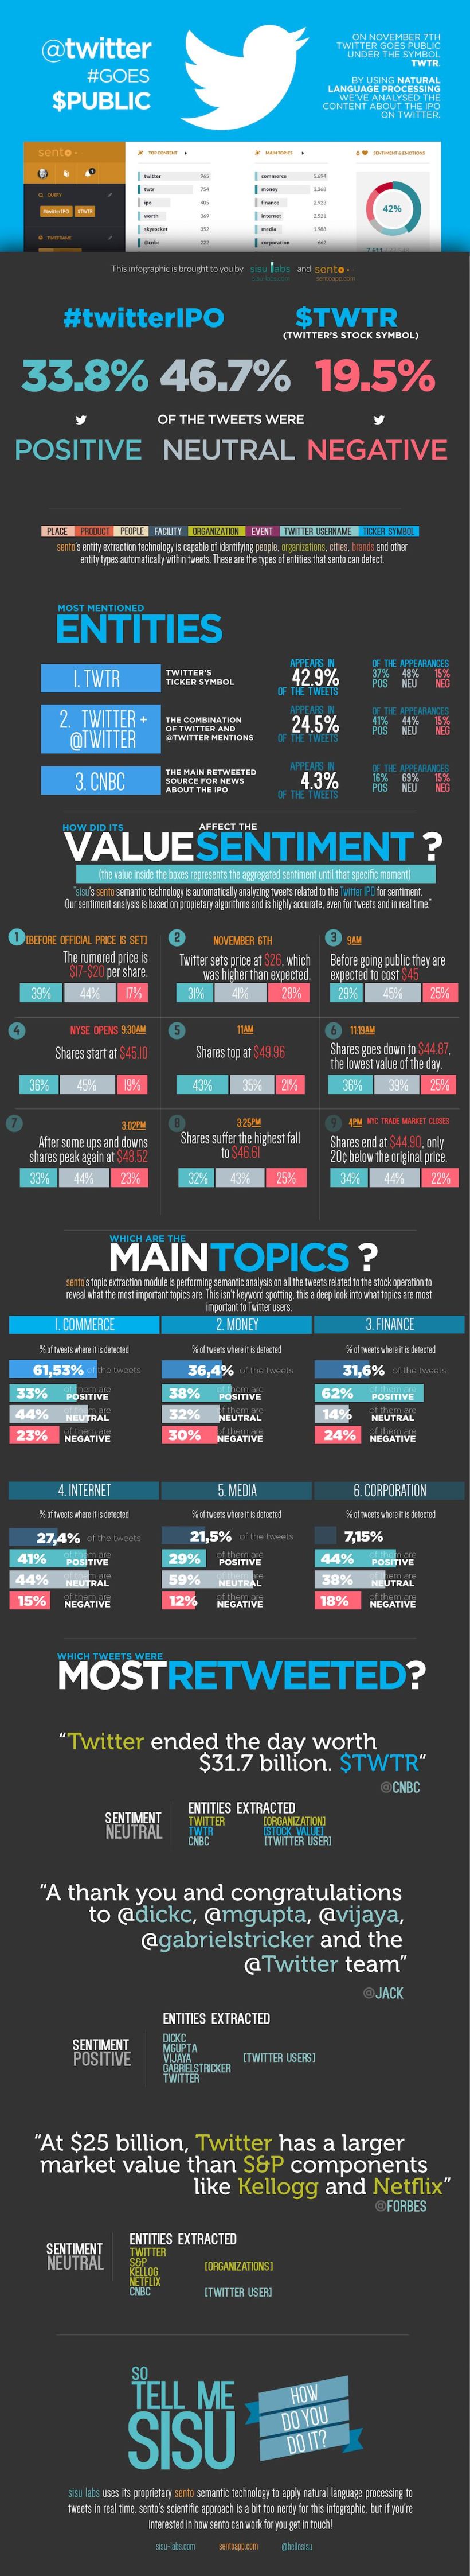 Twitter's IPO | Sentiment and perception | Infographic 2